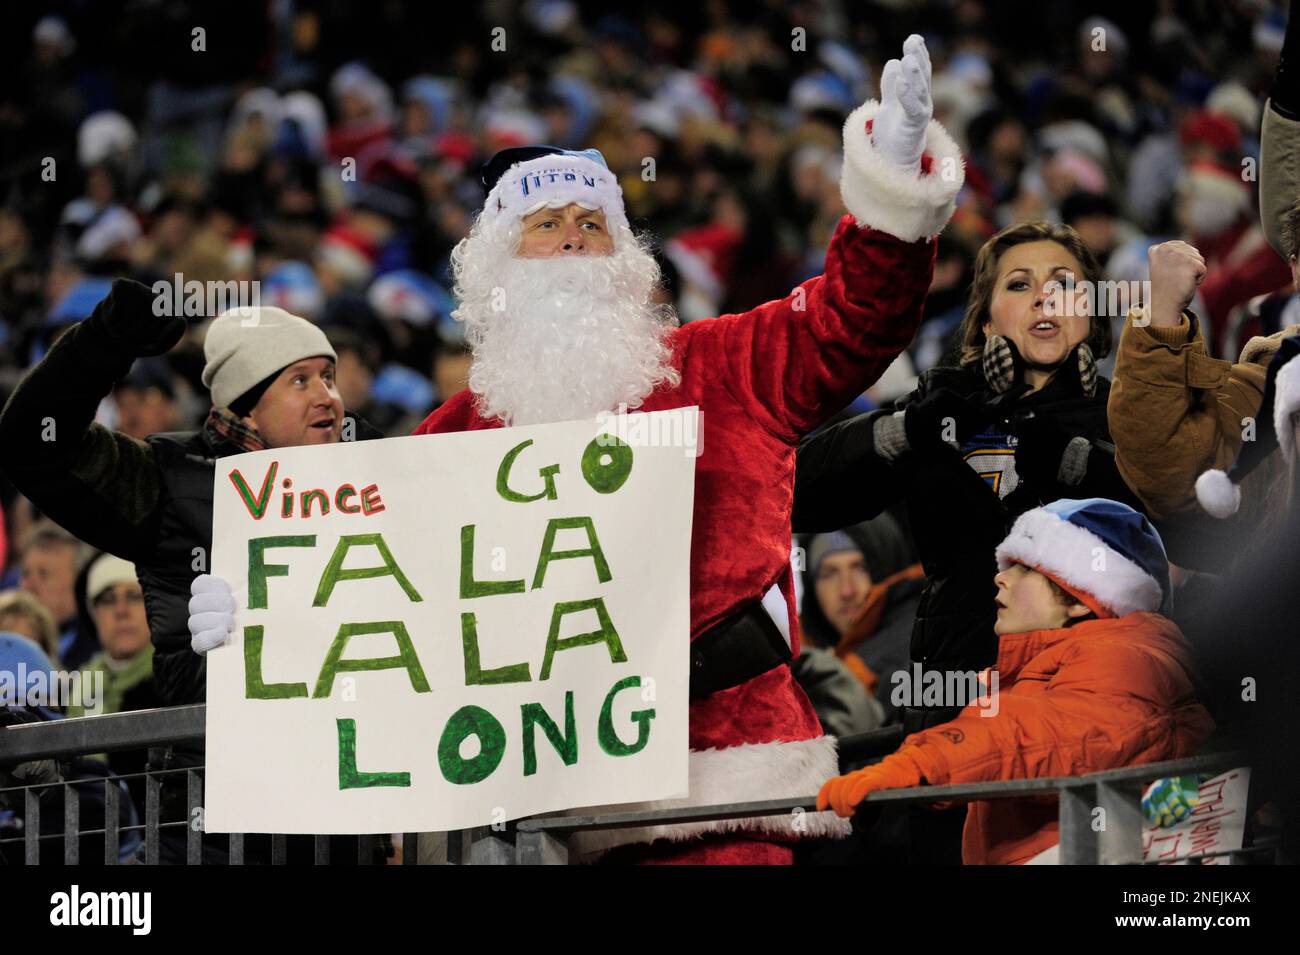 A Tennessee Titans fan is dressed as Santa as he watches the